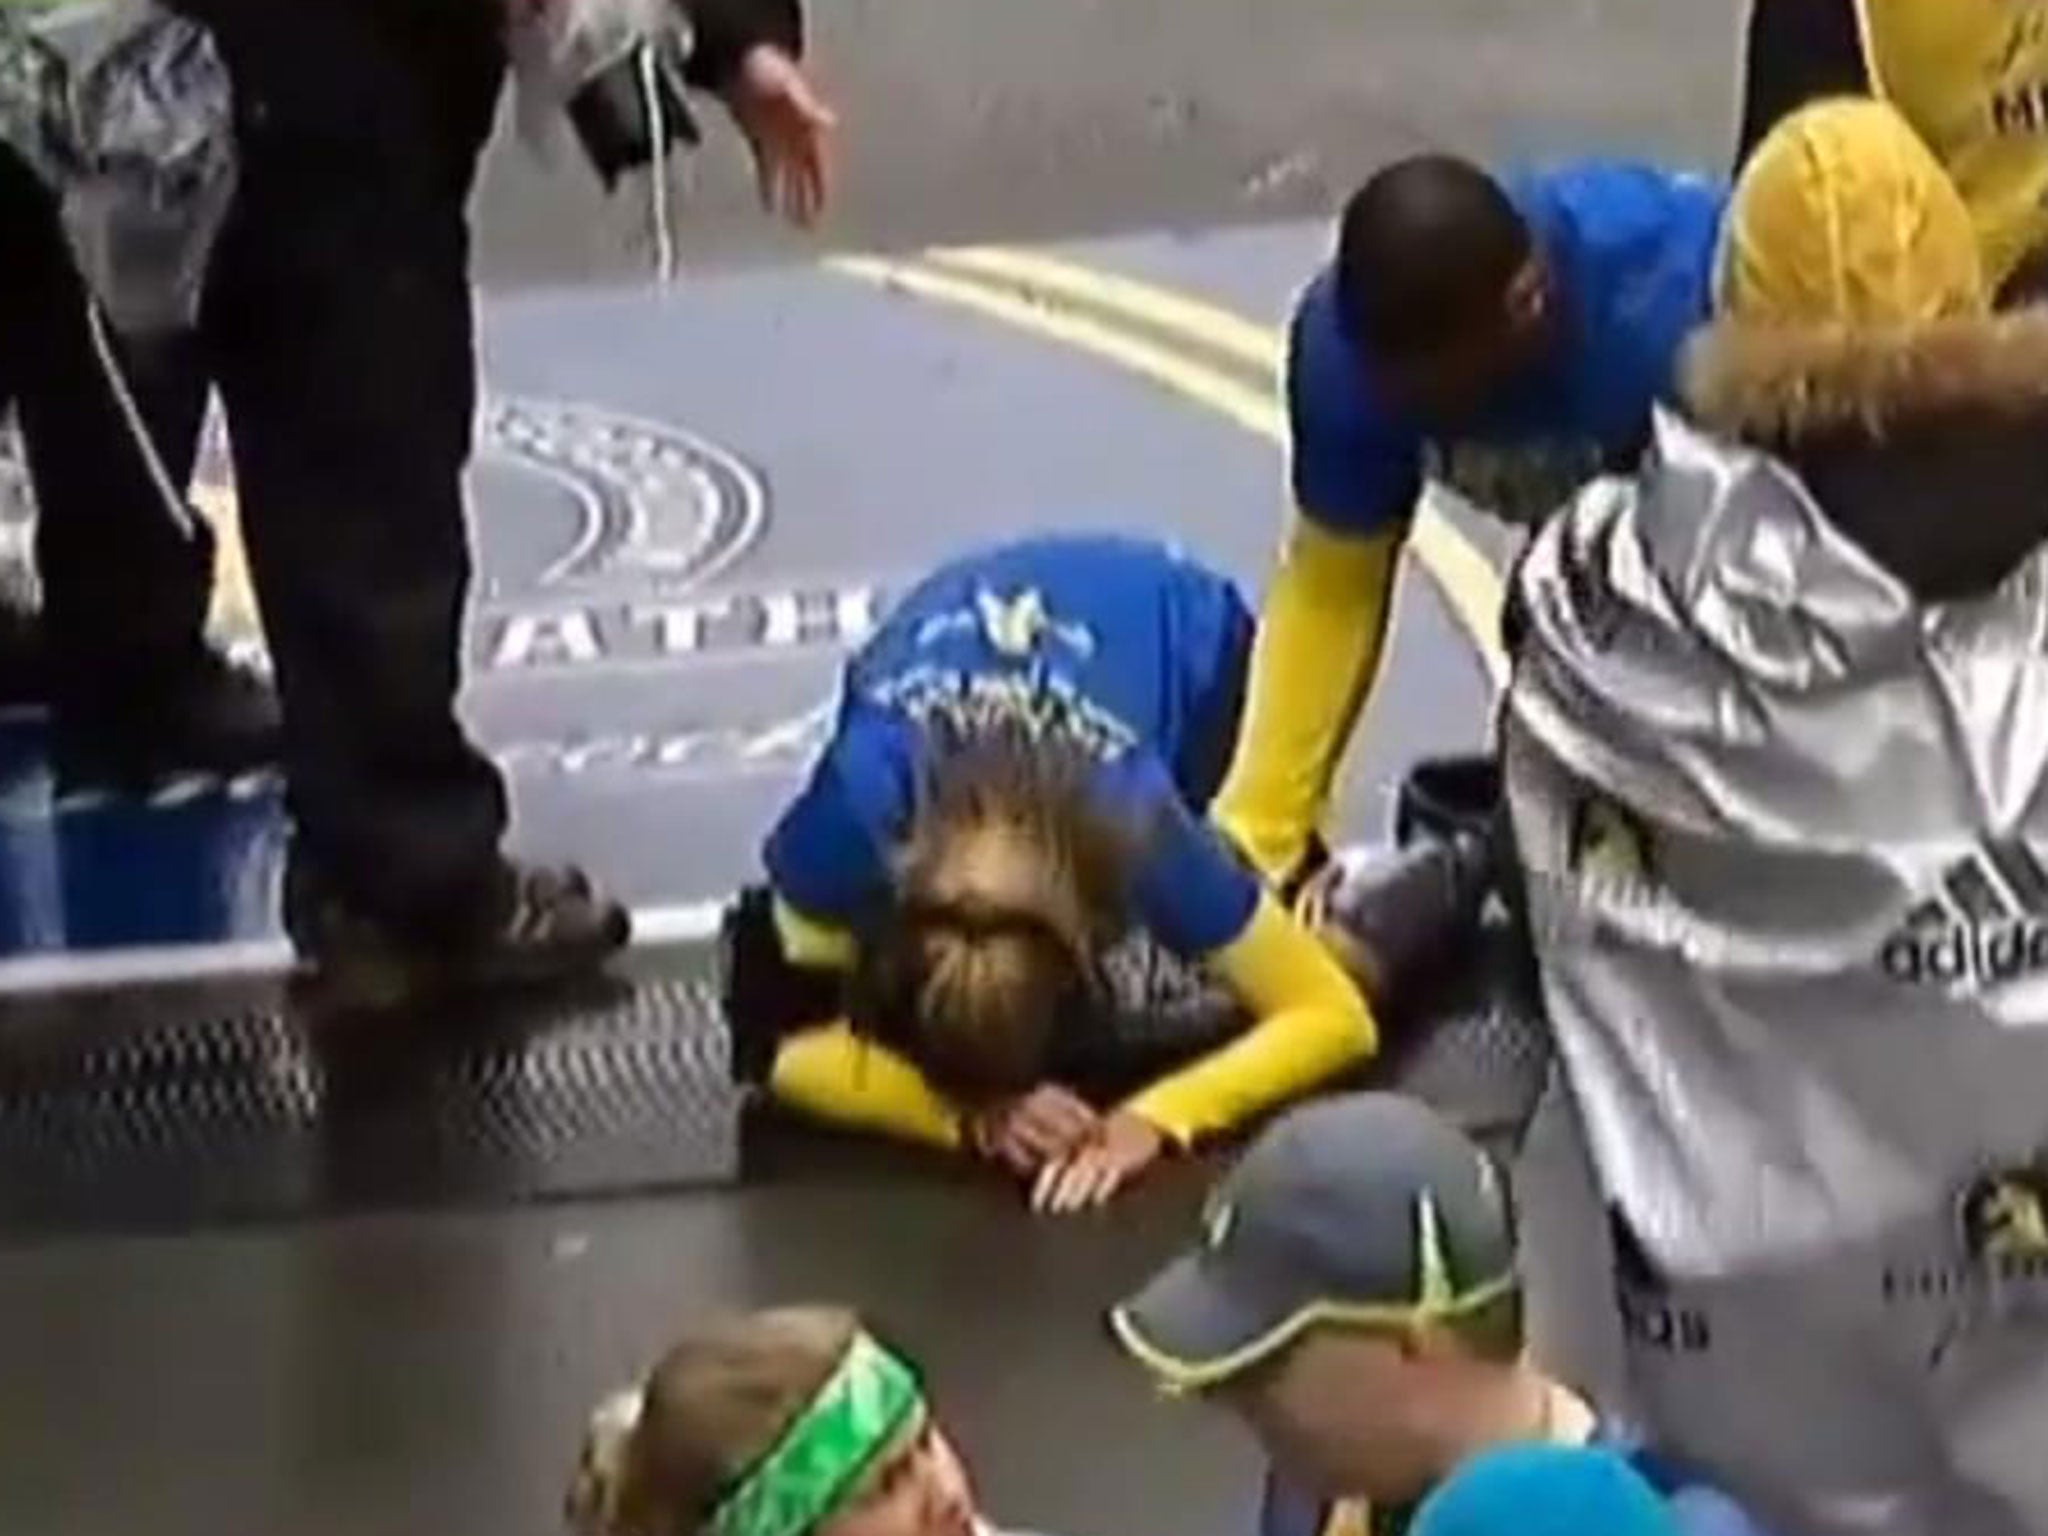 Rebekah Gregory crosses the finishing line of the Boston Marathon two years after she almost died in the bombings